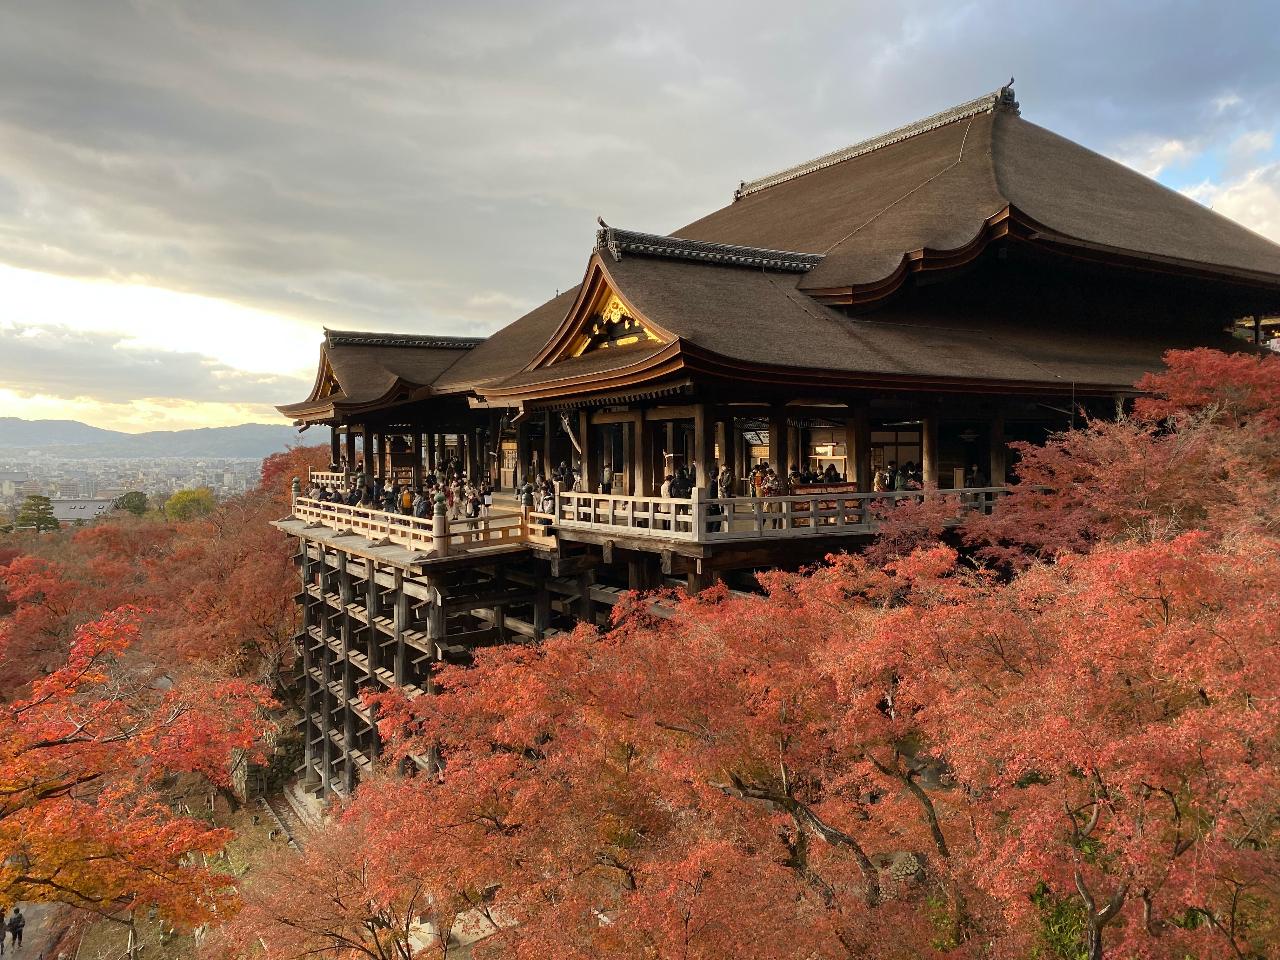 6-Day Classic Cultural Heritage Discovery Tour of Kyoto 